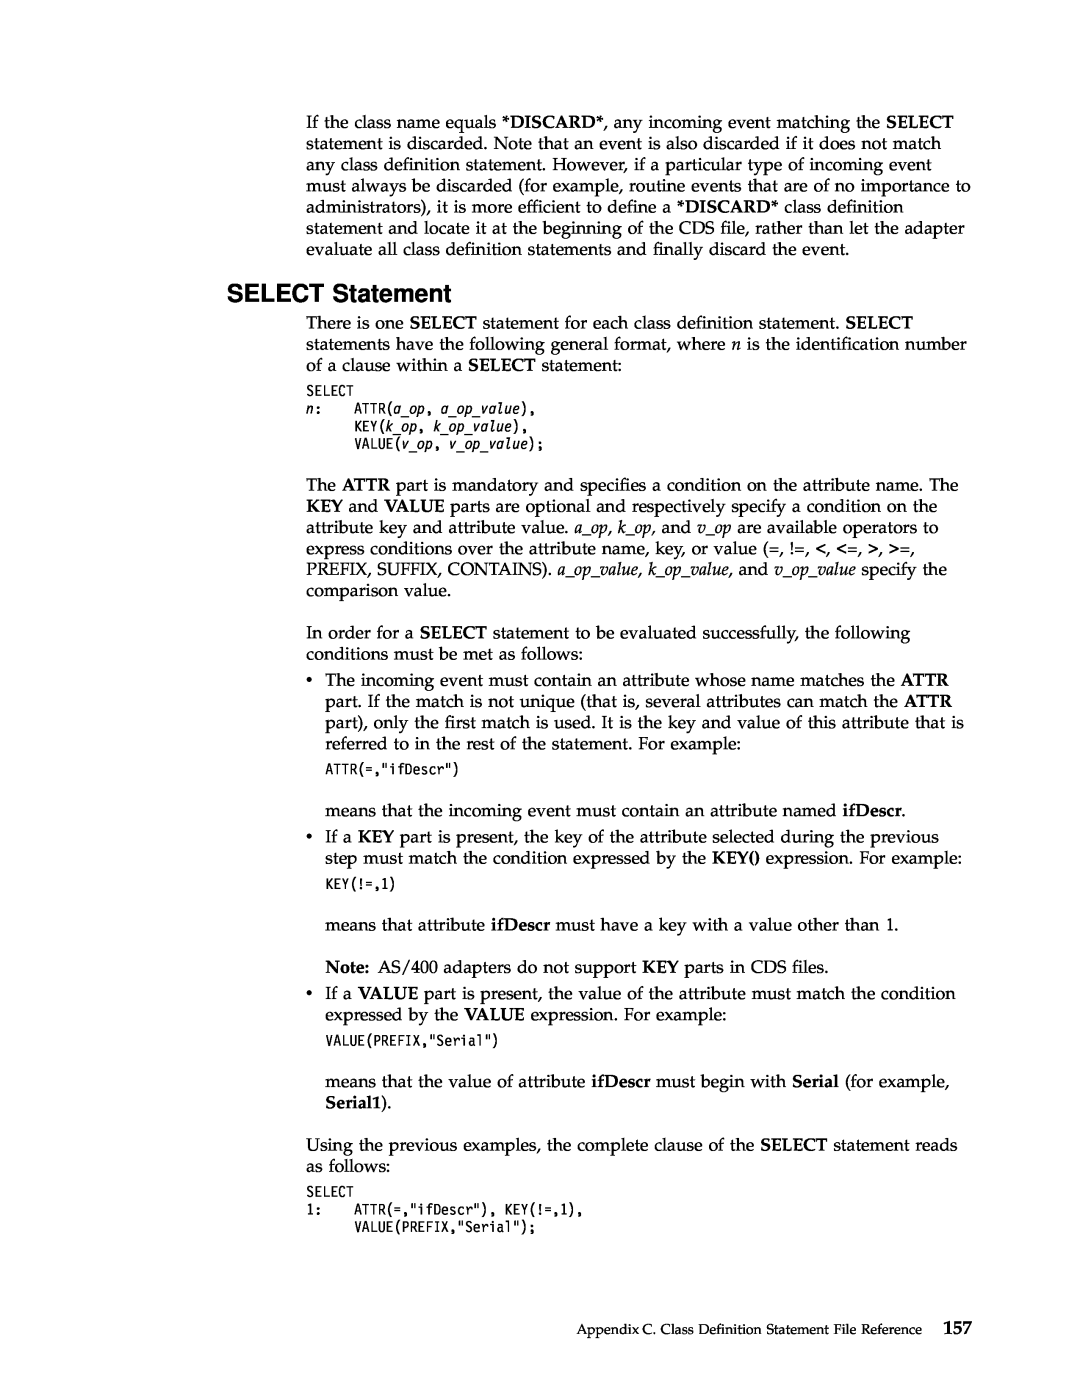 IBM Enterprise Console manual Note AS/400 adapters do not support KEY parts in CDS files 